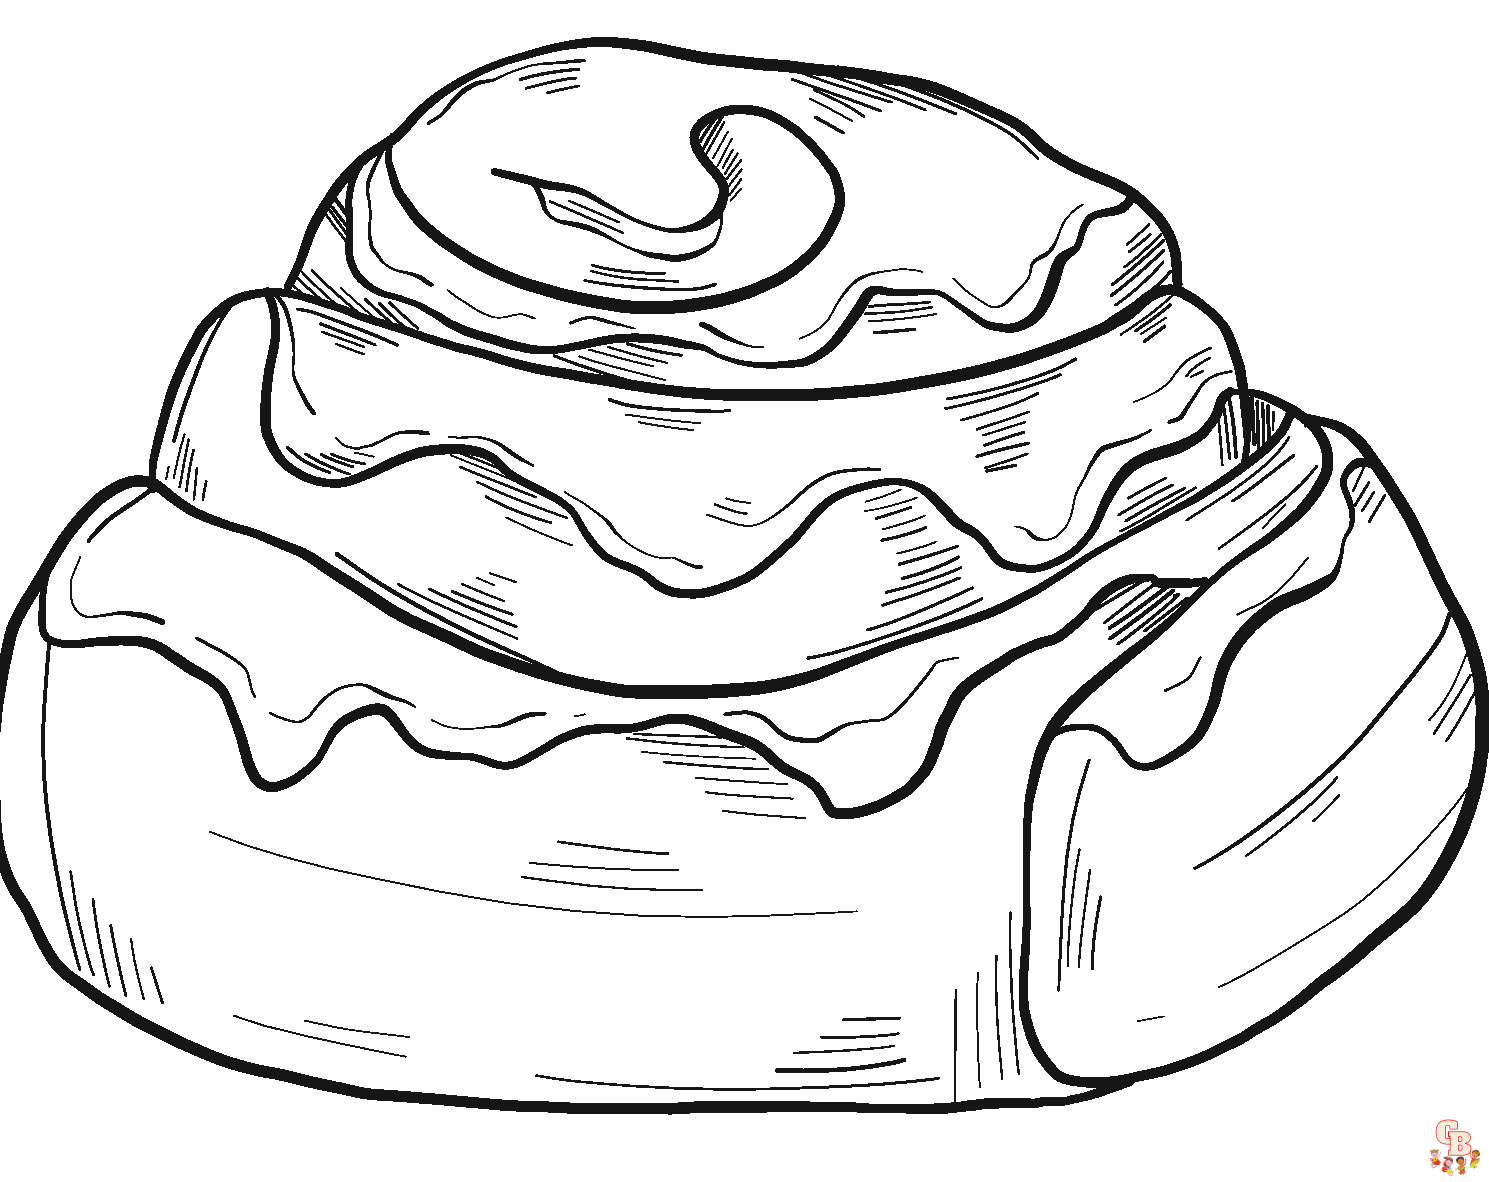 Cinnamon roll coloring pages to print